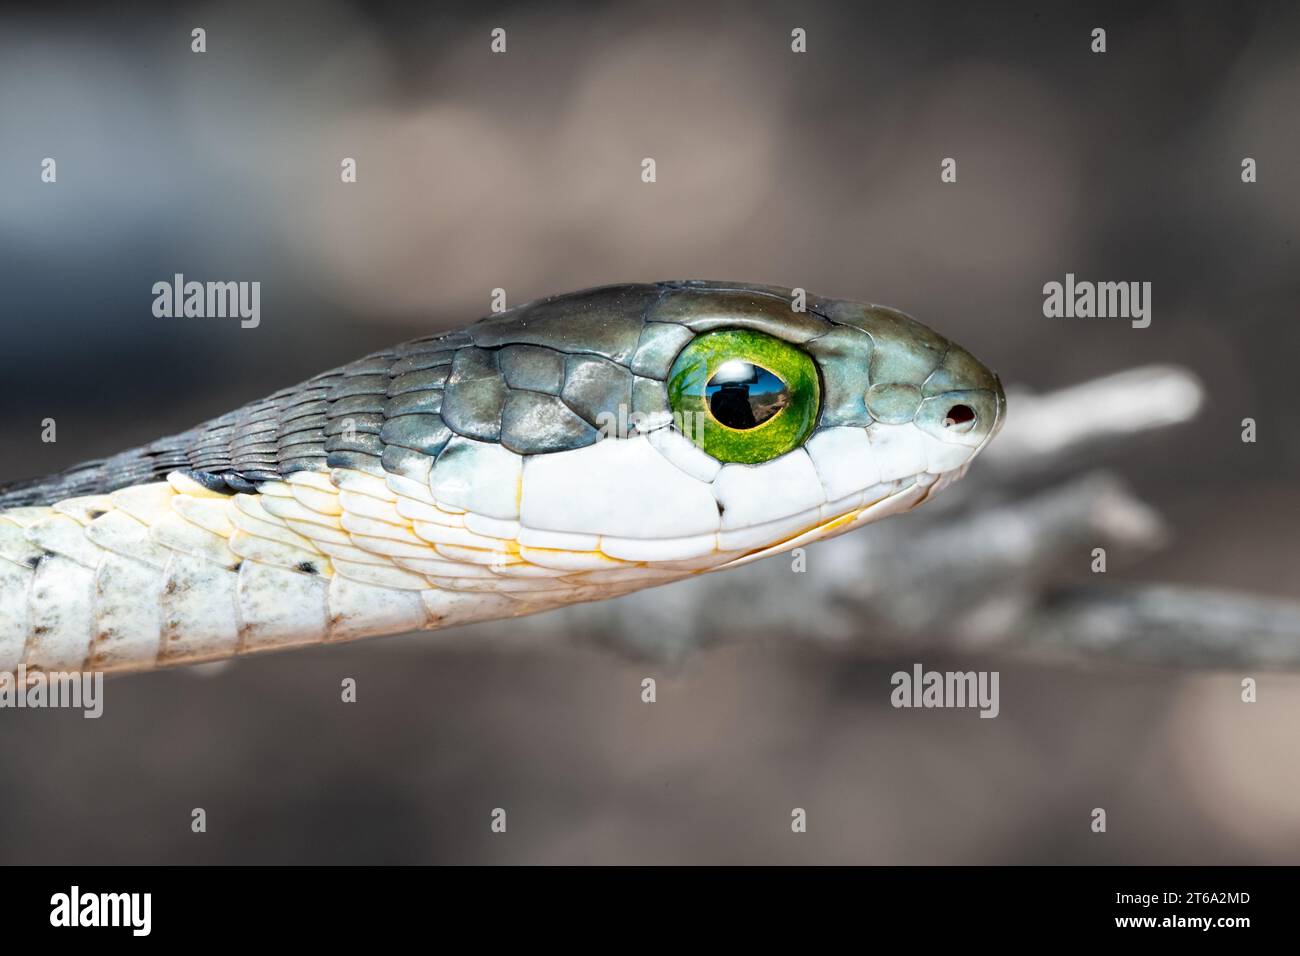 A bright green snake with two circular eyes perched on a tree branch Stock Photo